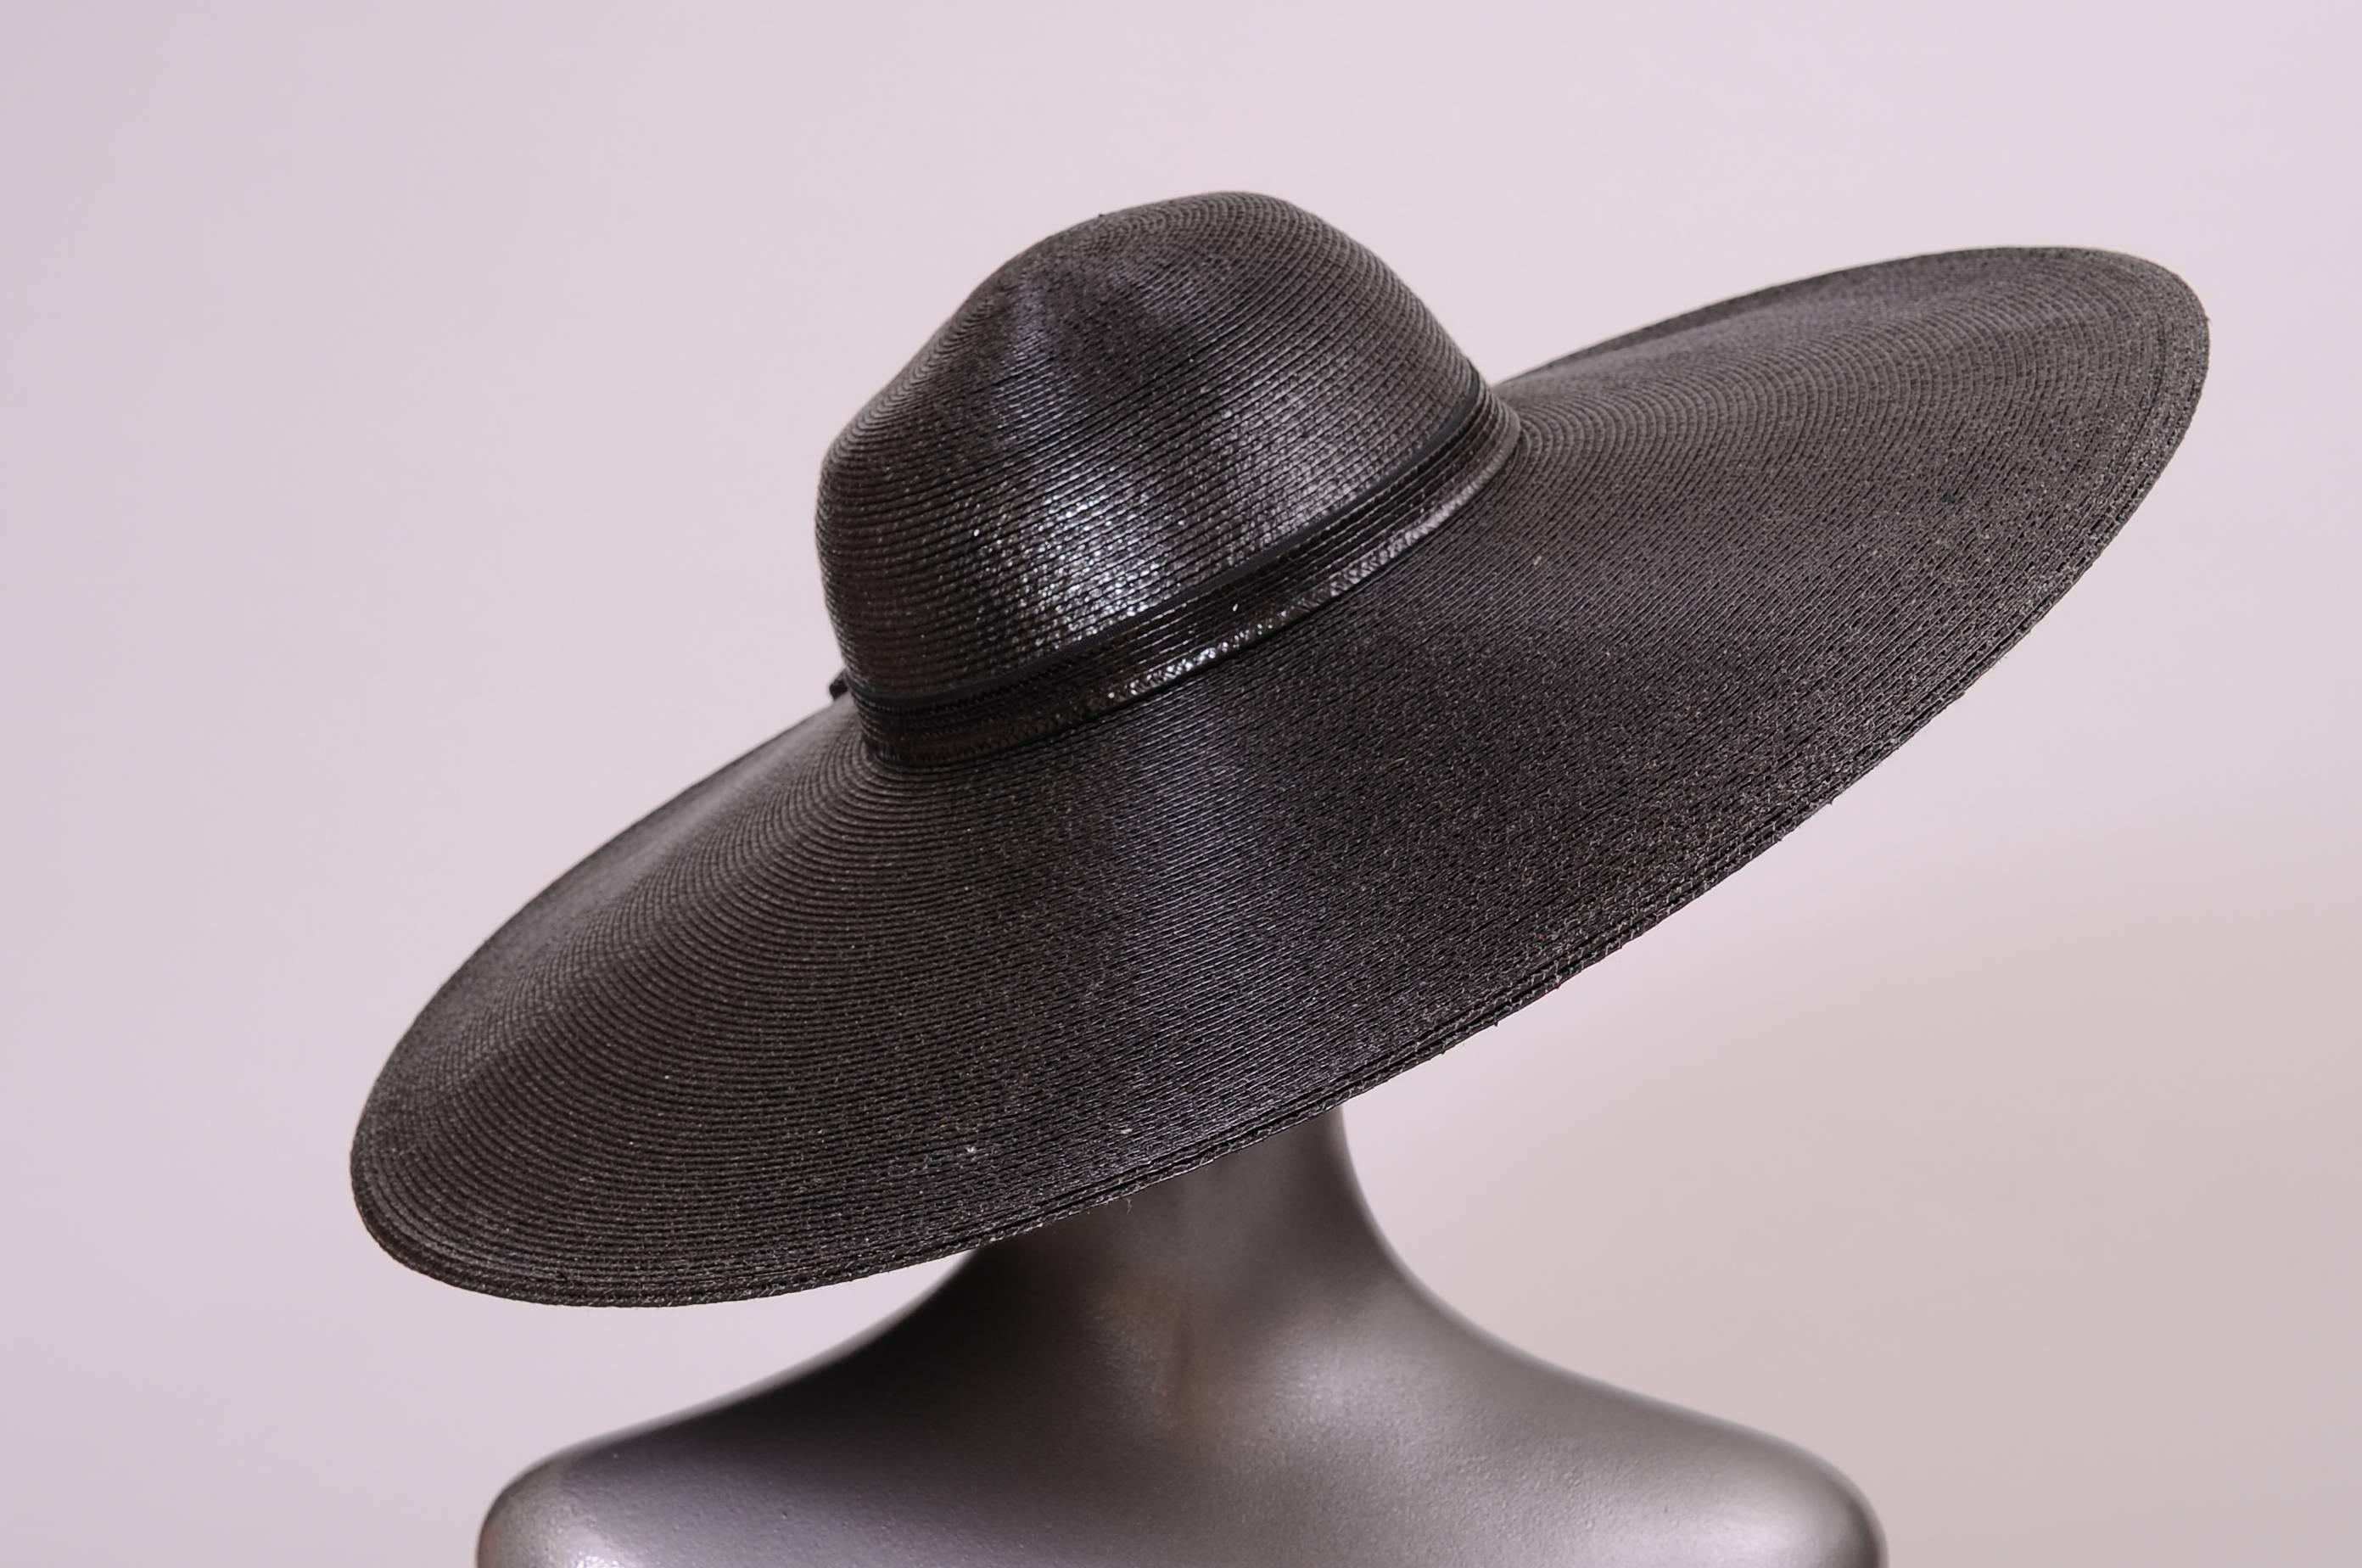 This fabulous big picture hat made from a shiny black straw was designed by Bellini for the high end retailer Nan Duskin. The hat has a decorative straw ribbon at the crown and it is in excellent condition.
Measurements;
Interior circumference